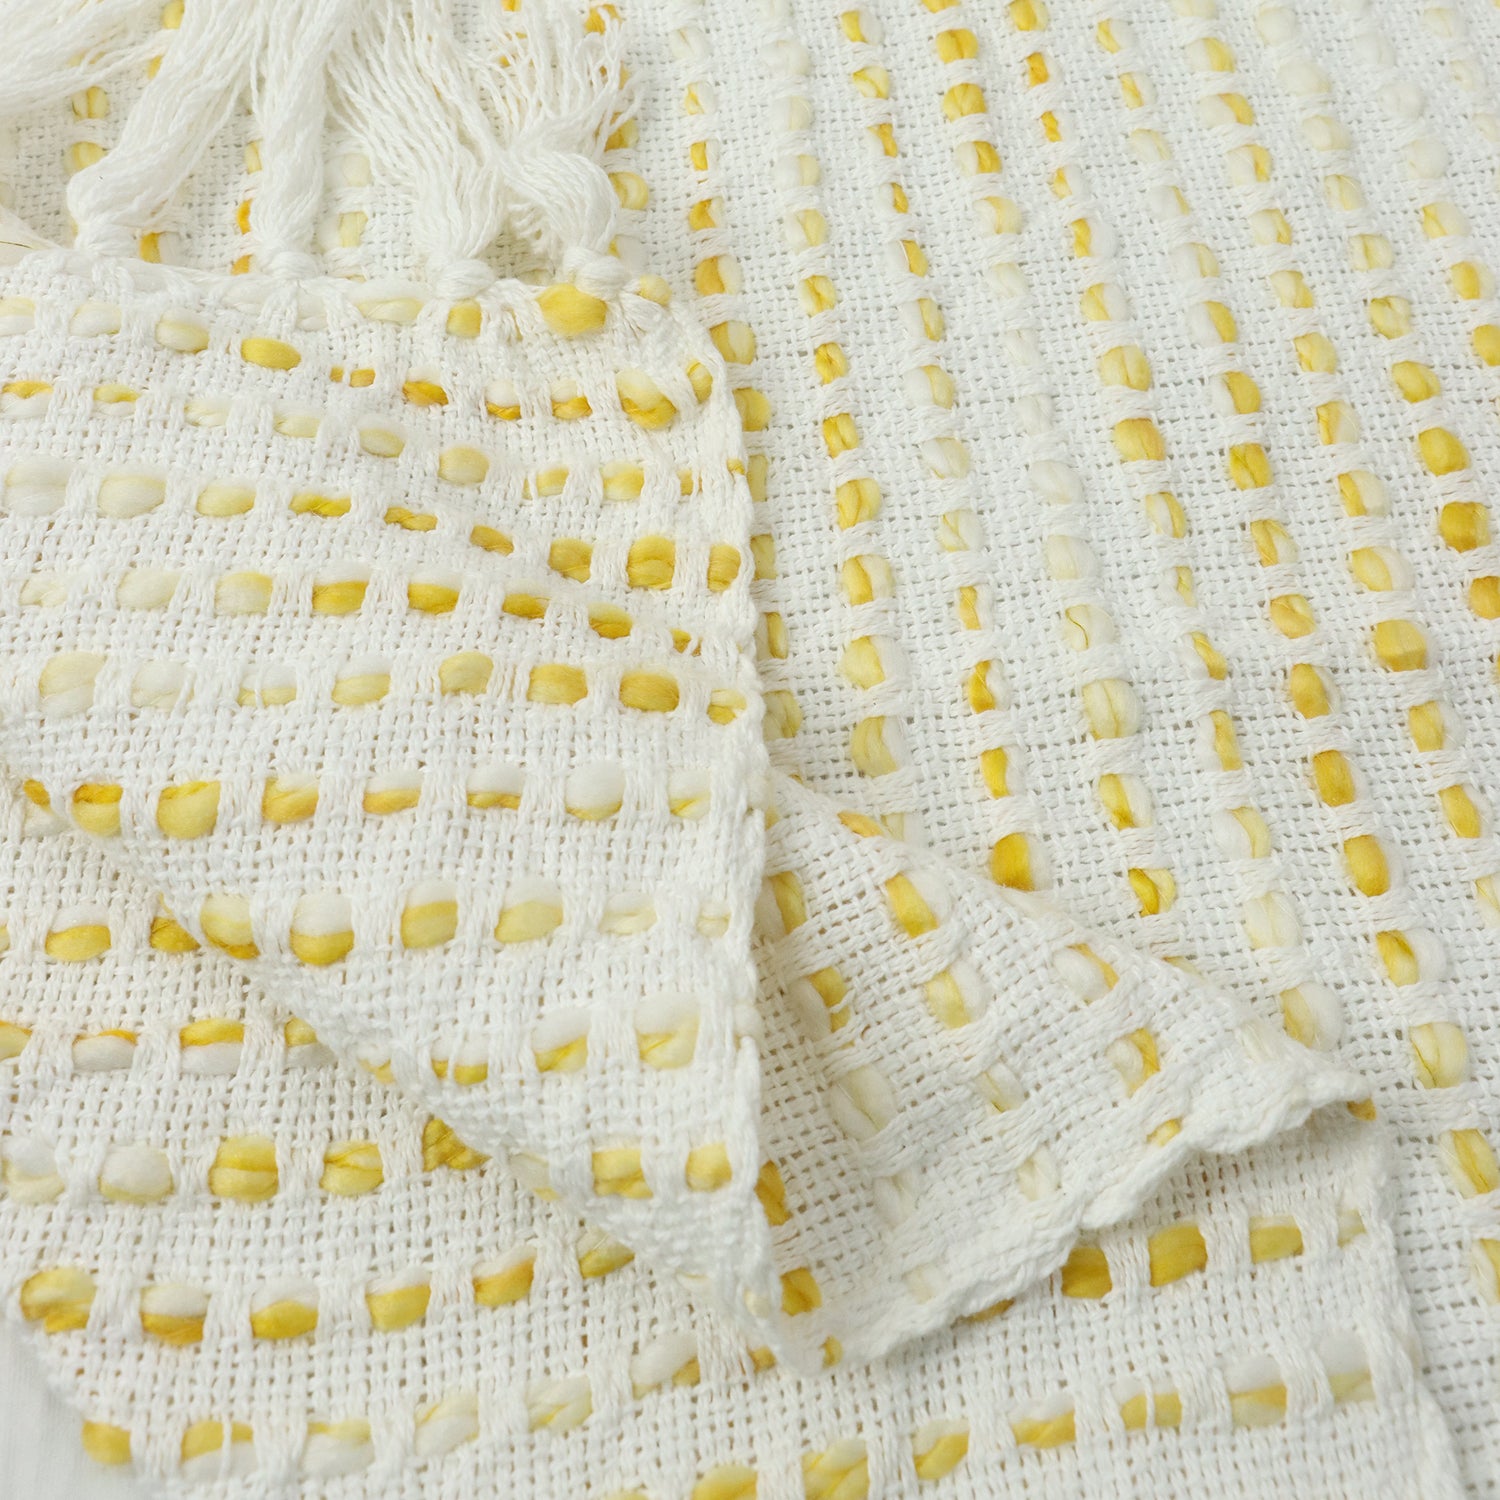 Soft Cotton Home Decorative Throw Blanket Yellow Solid